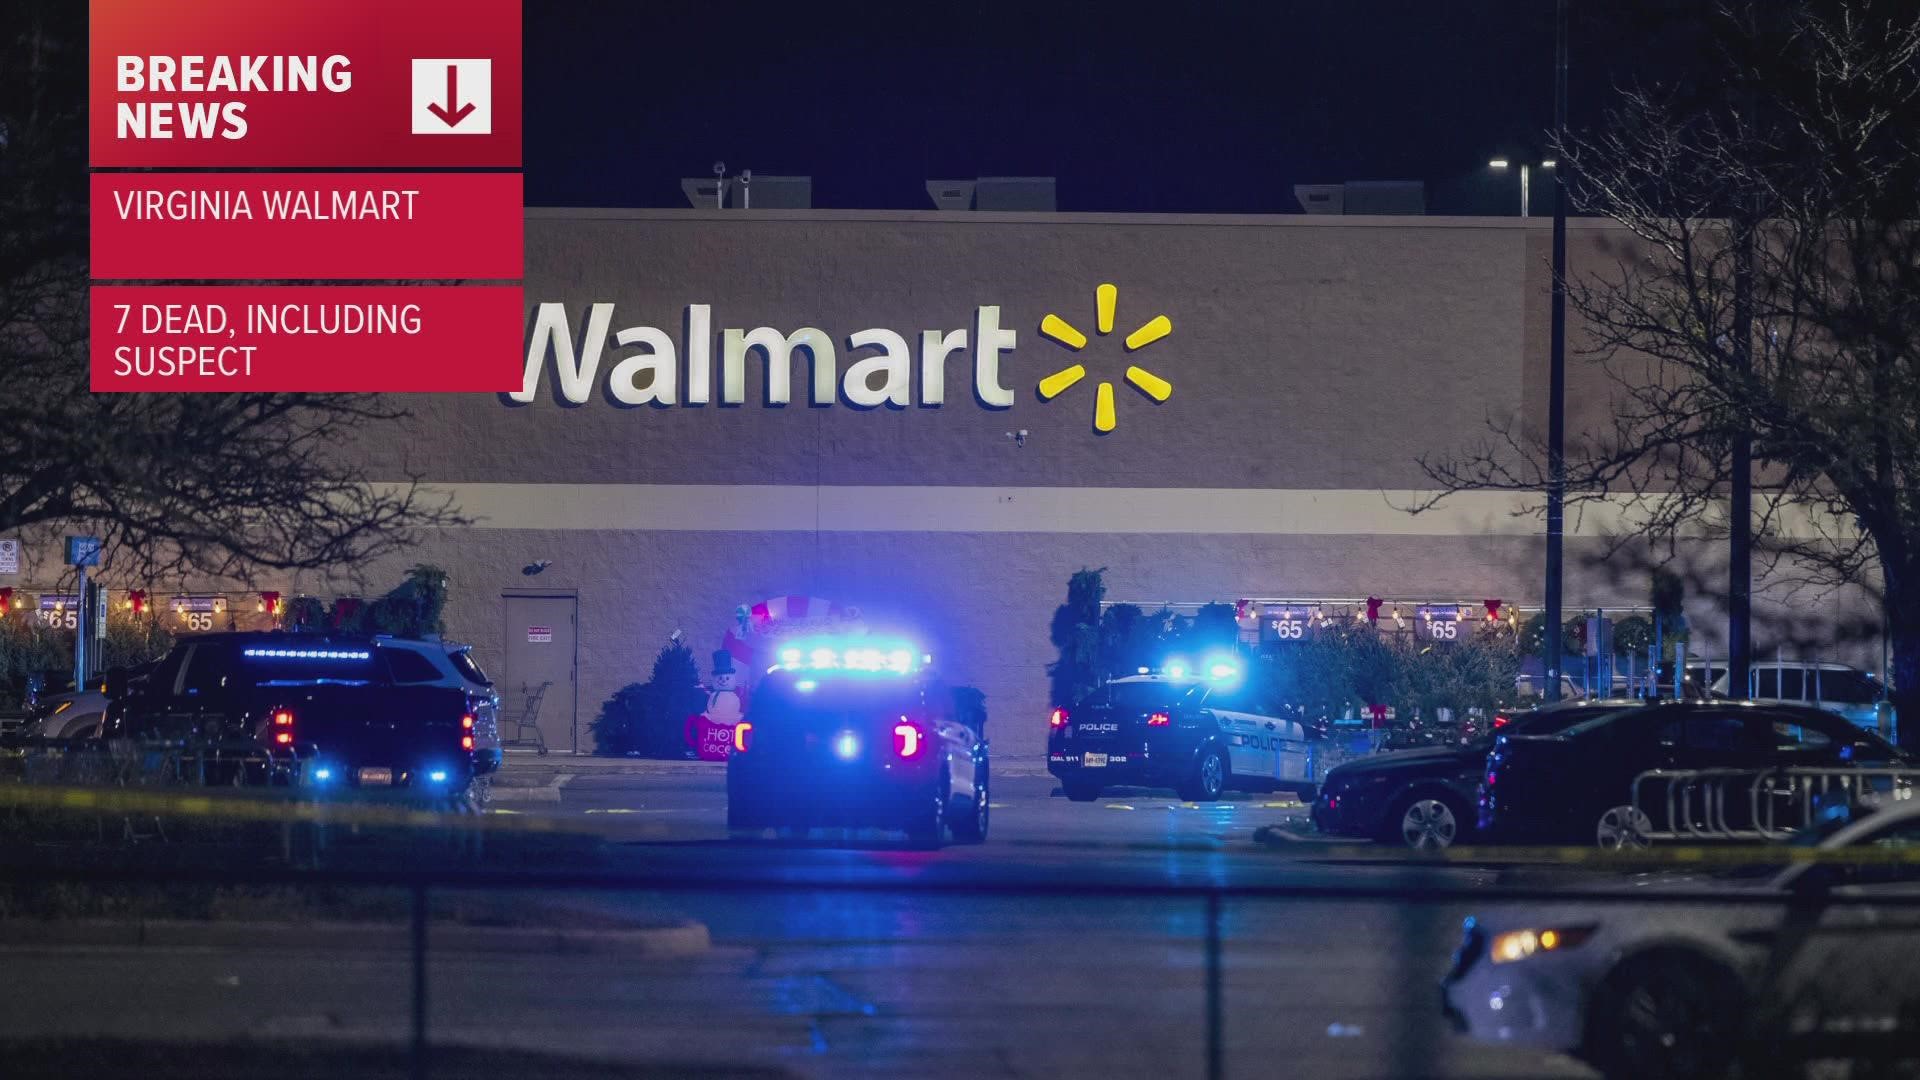 Seven people were killed, including the suspect, who was an employee, authorities said.